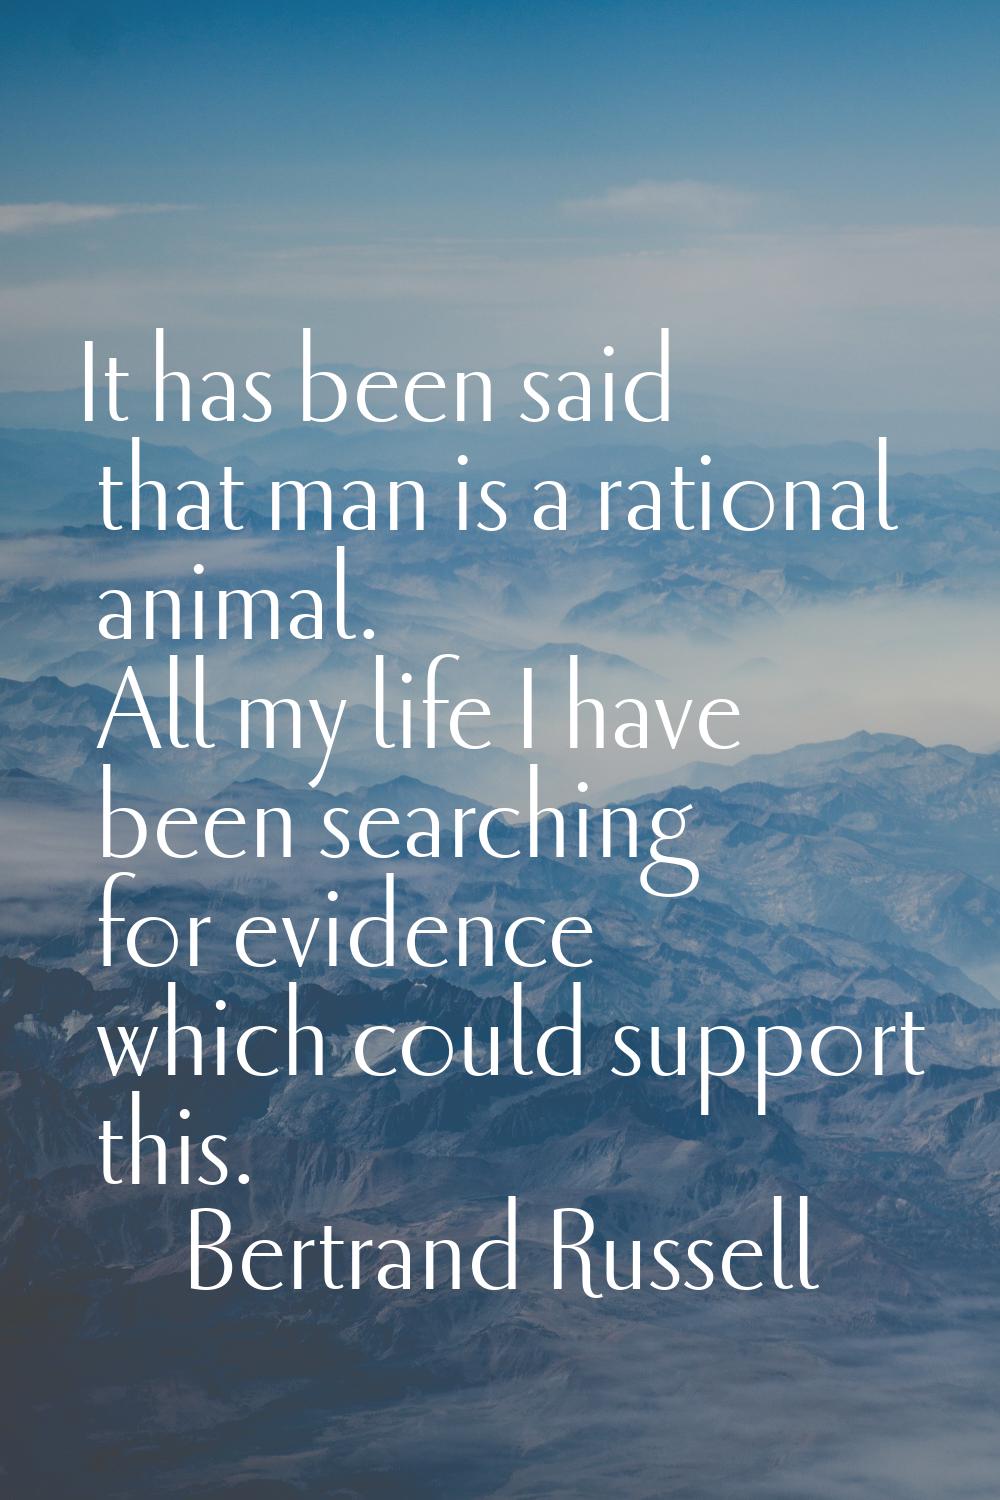 It has been said that man is a rational animal. All my life I have been searching for evidence whic